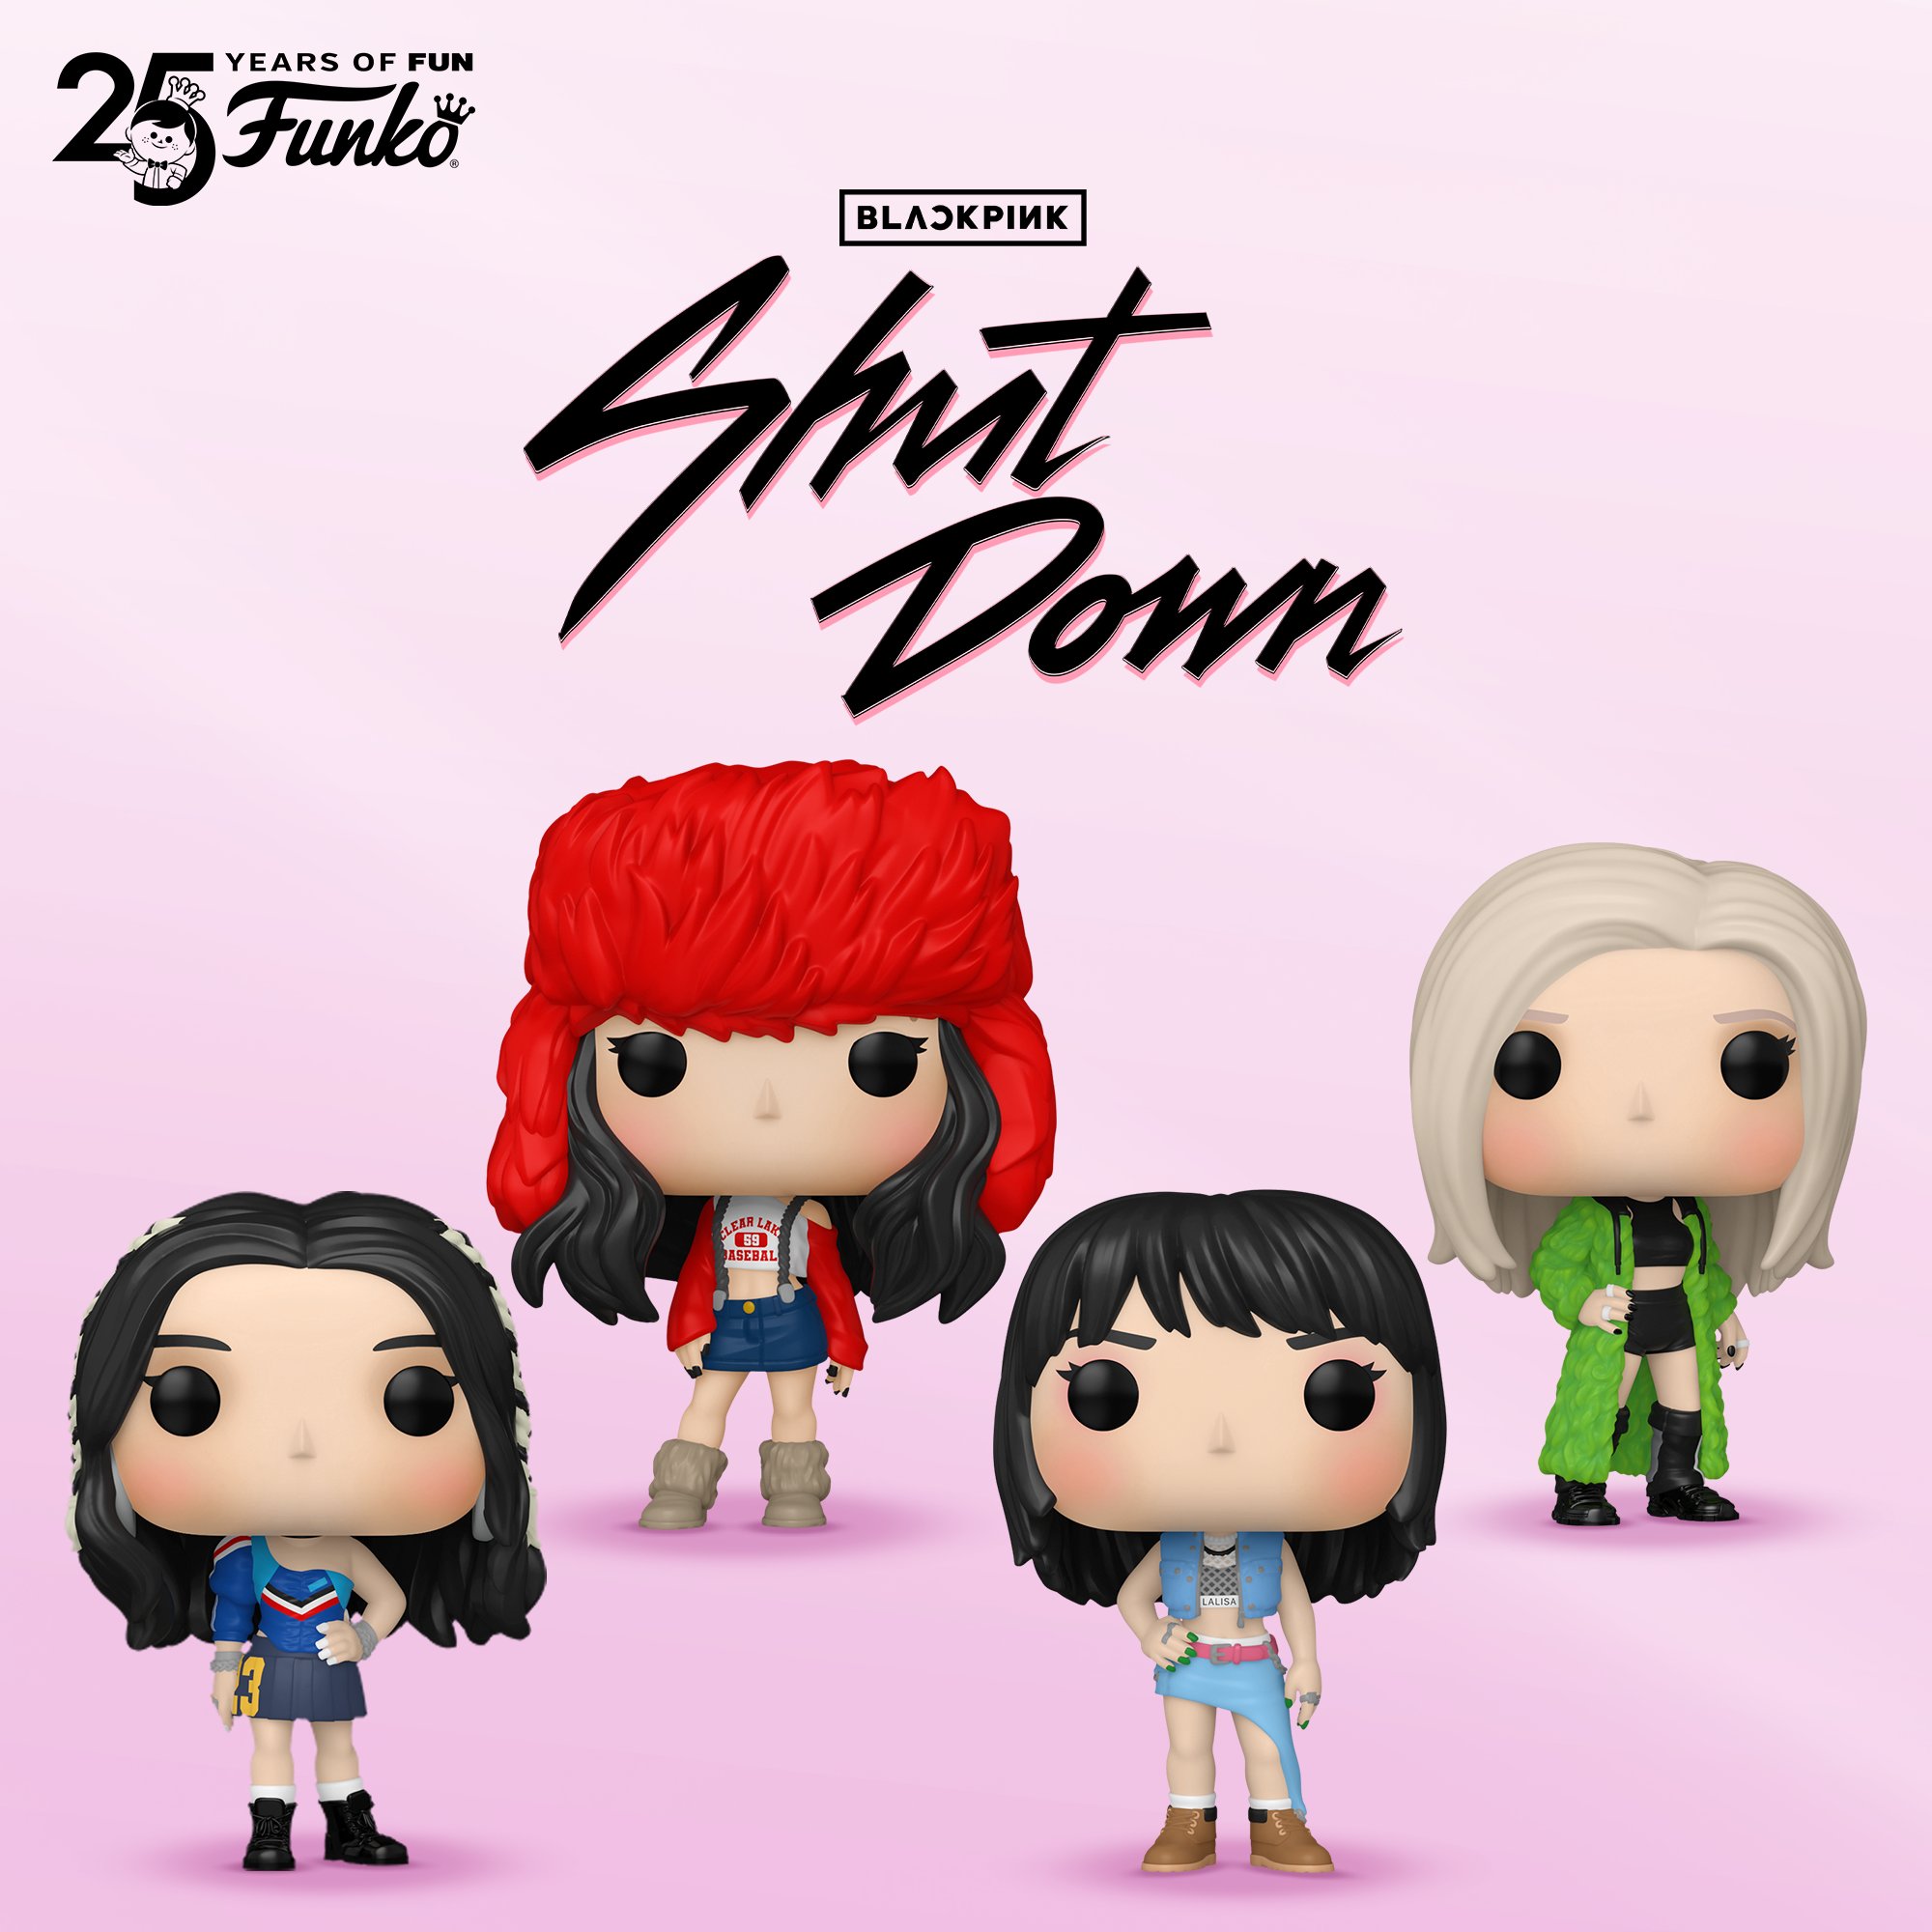 Funko on X: Coming soon: BLACKPINK makes their debut as officially  licensed Funko collectibles! Sign up to be notified when Pop! JISOO, Pop!  JENNIE, Pop! ROSÉ, and Pop! LISA are available at